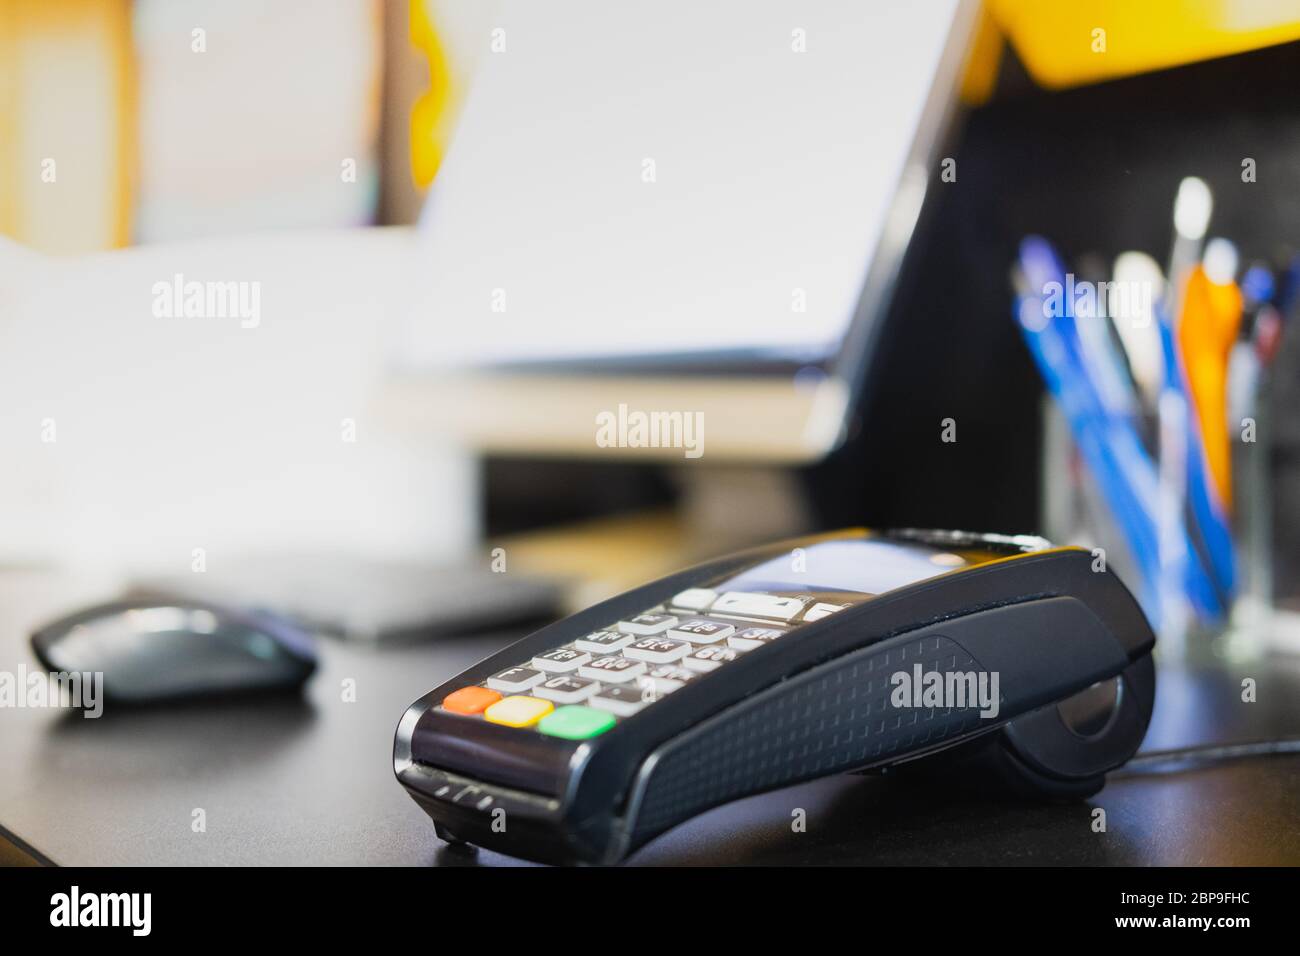 Payment terminal on a table, close-up view. POS terminal at cashier desk of a retail store, local business concept Stock Photo